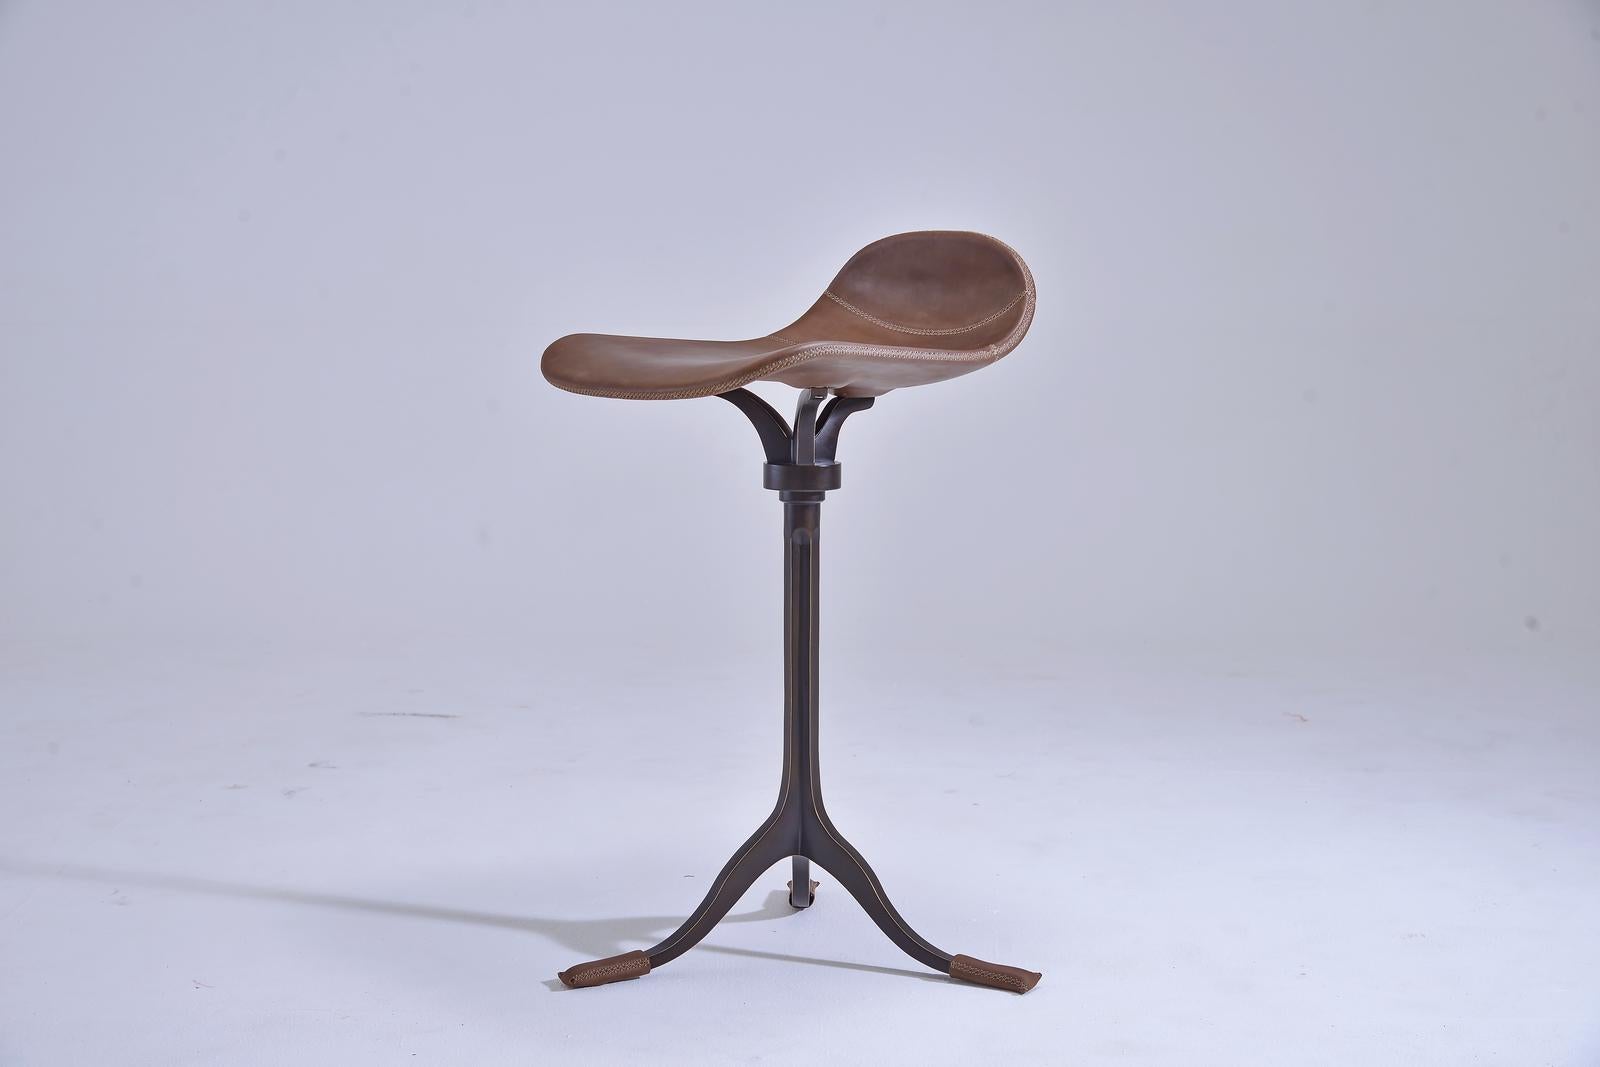 Model: PT48 counter-height and swivel stool
Seat: Leather
Seat color: Truffe
Base: PT48 base, with swivels and hand cast brass
Base finish: Brushed brown
Dimensions: 52 x 50 x 78 cm (seat height 66 cm)
(W x D x H) 20.5 x 21.7 x 30.7 inch (seat